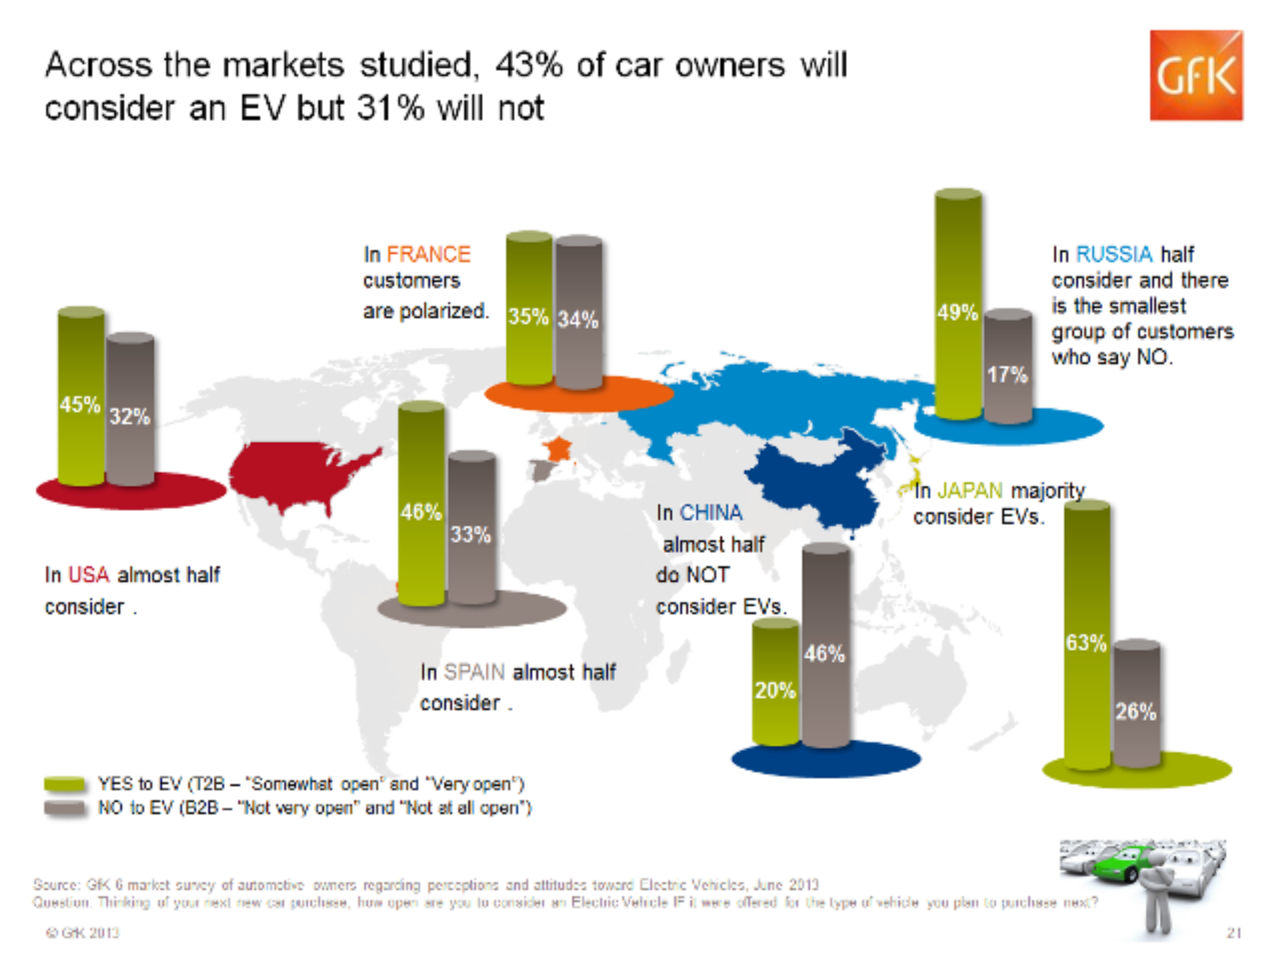 Graphic_consideration to buy EV by country_640x480